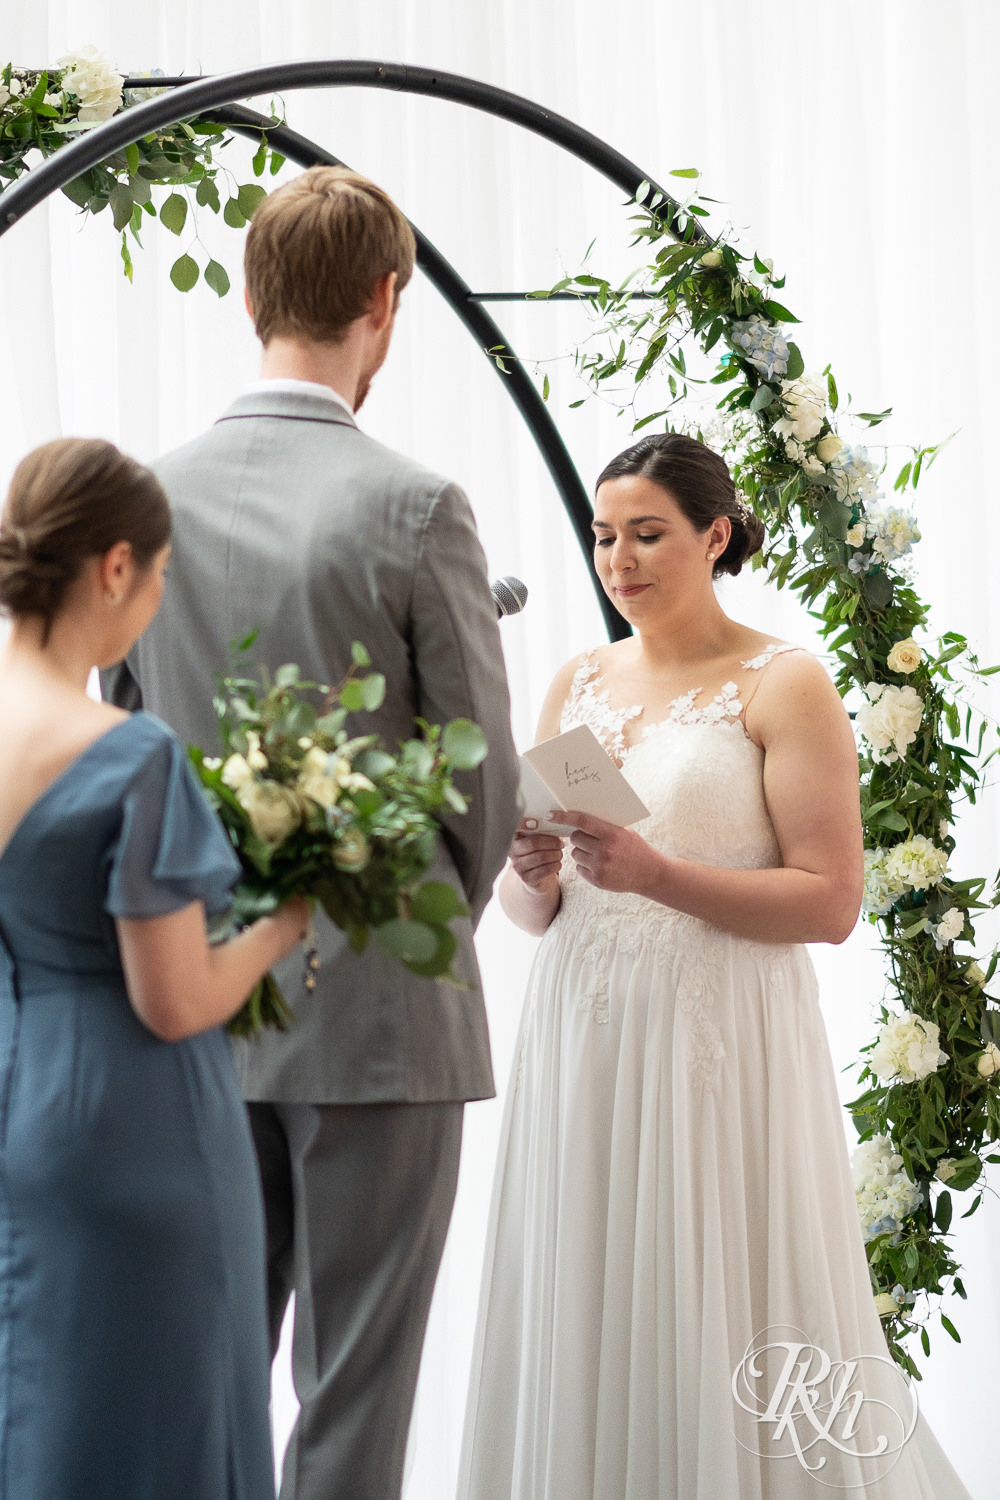 Bride reads vows during wedding ceremony at Doubletree Hilton Saint Paul in Saint Paul, Minnesota.